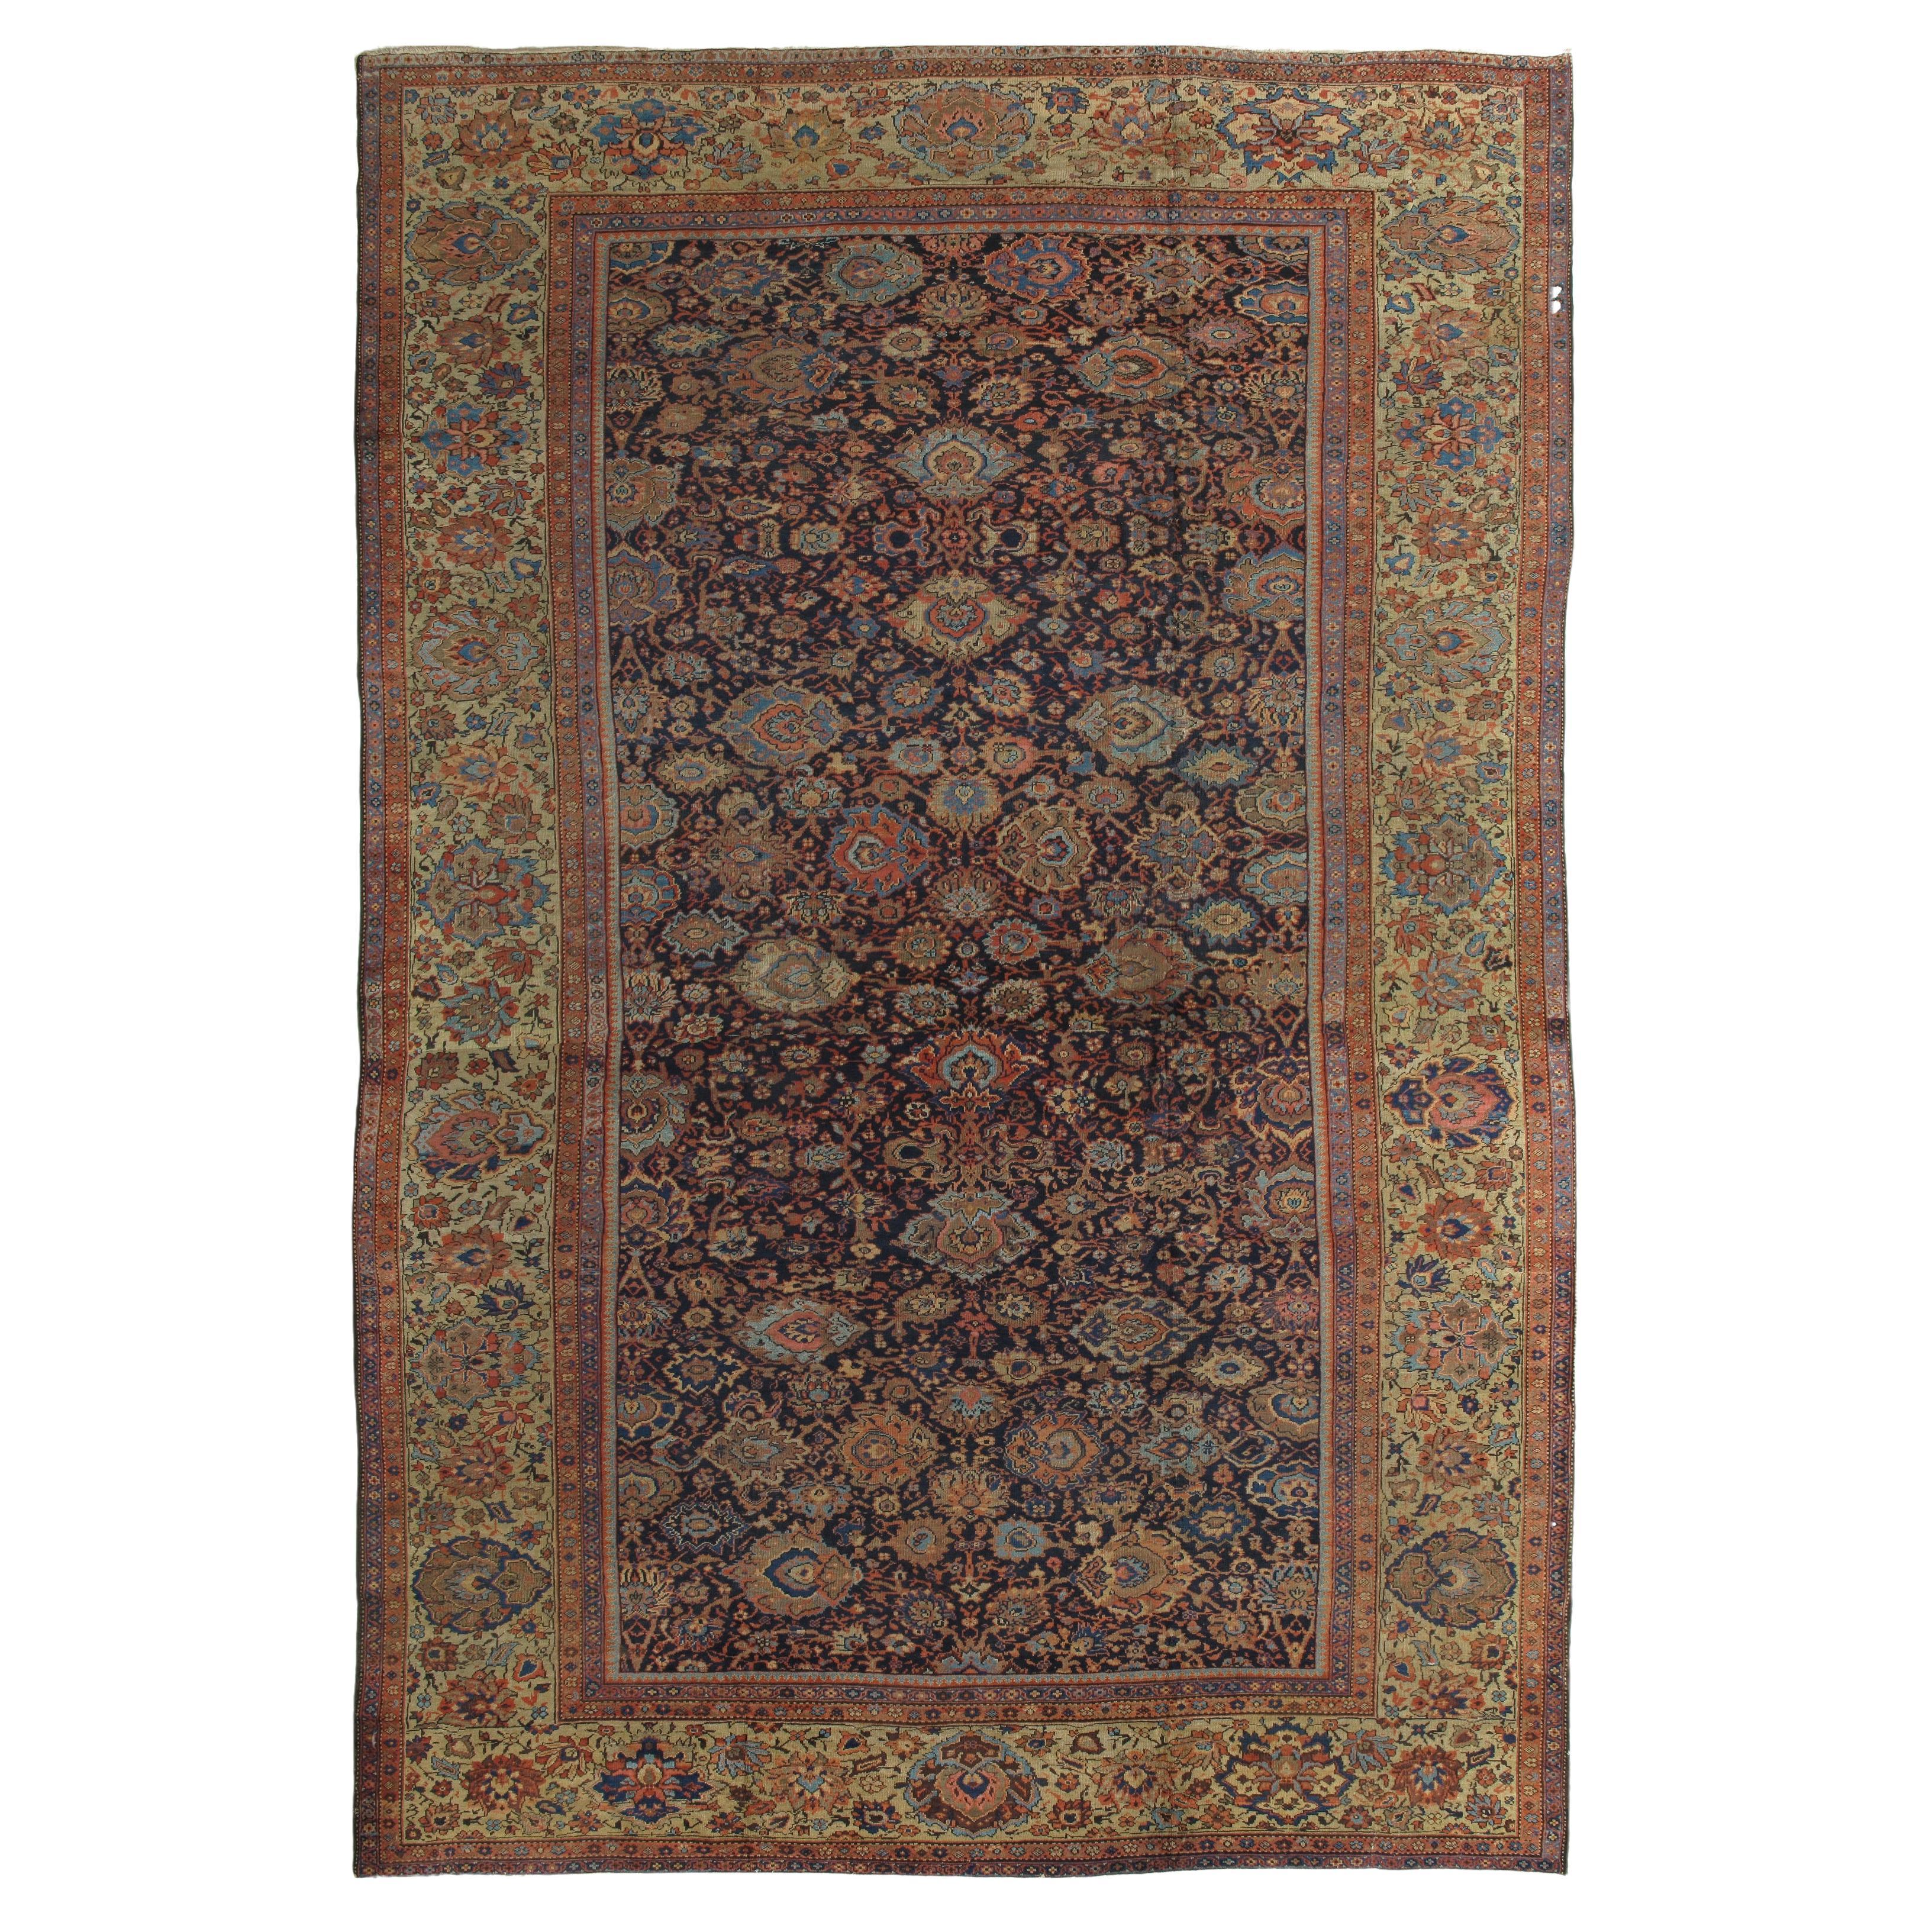 Antique Persian Sultanabad Carpet, Handmade Oriental Rug, Navy Blue, Rust, Gold For Sale